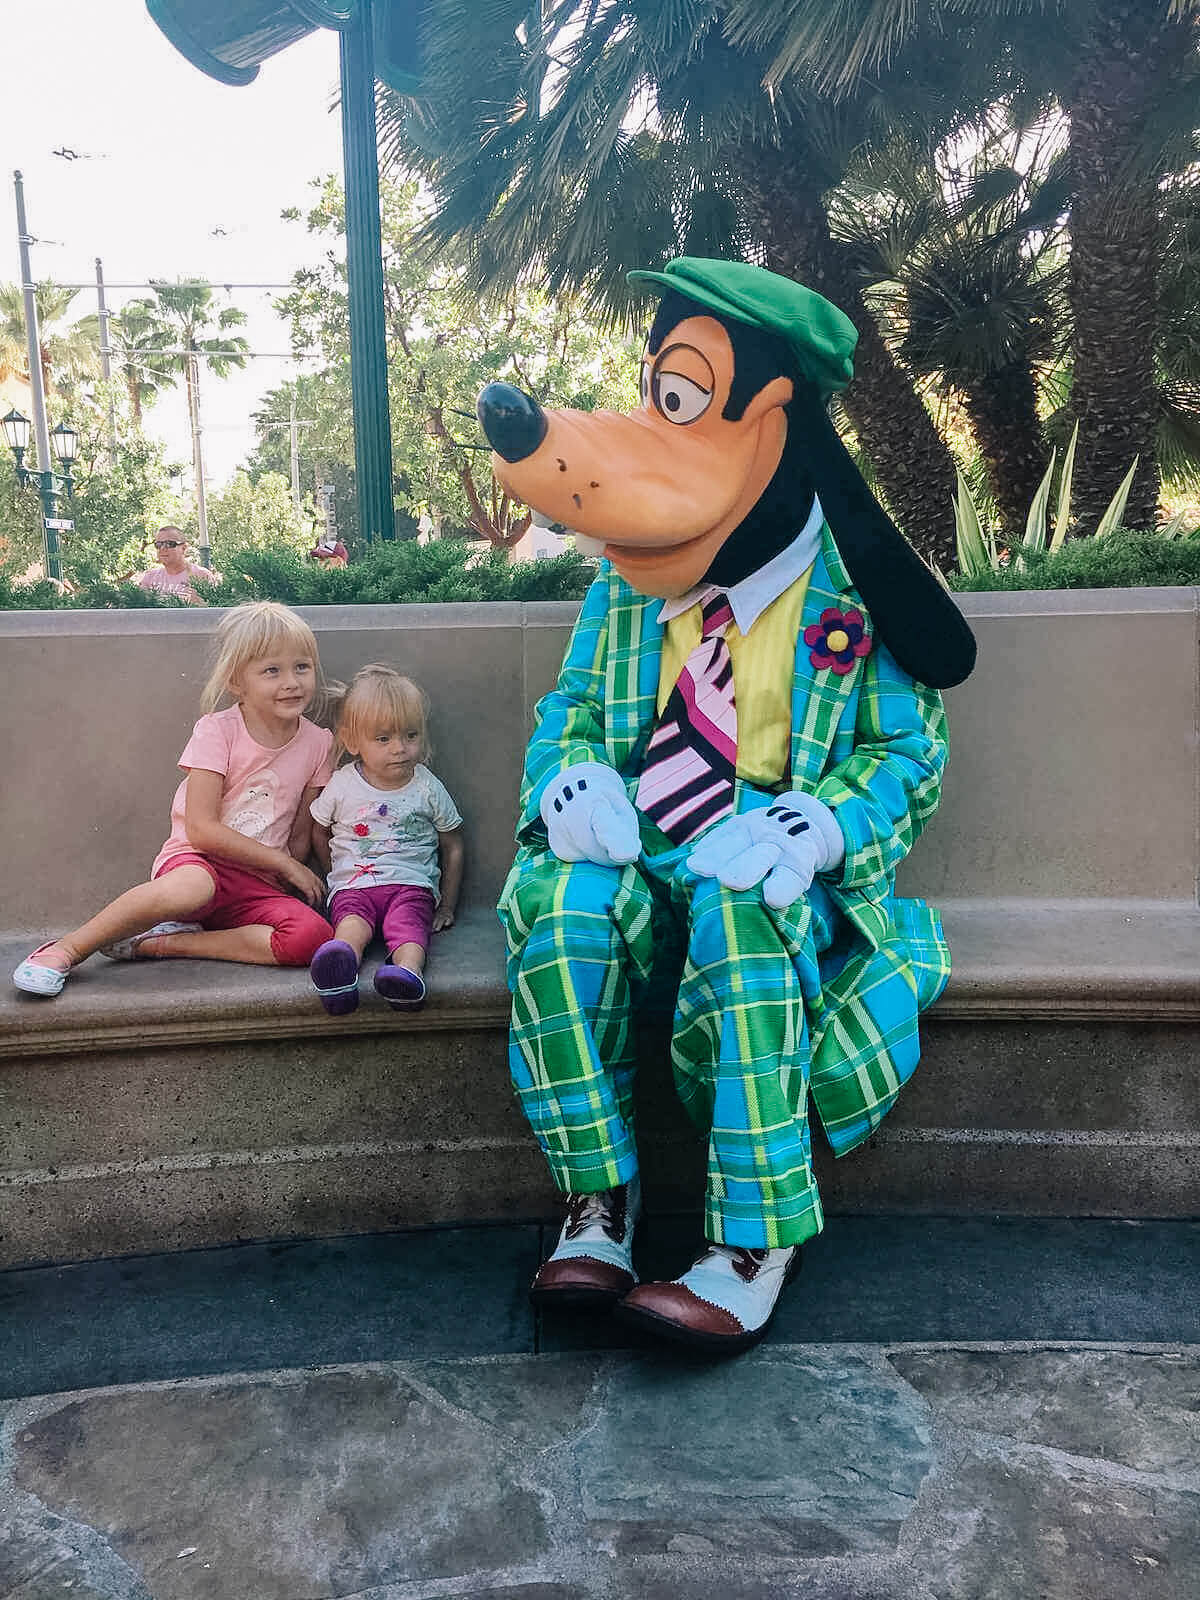 Two young kids sitting next to goofy at disney california adventure park.